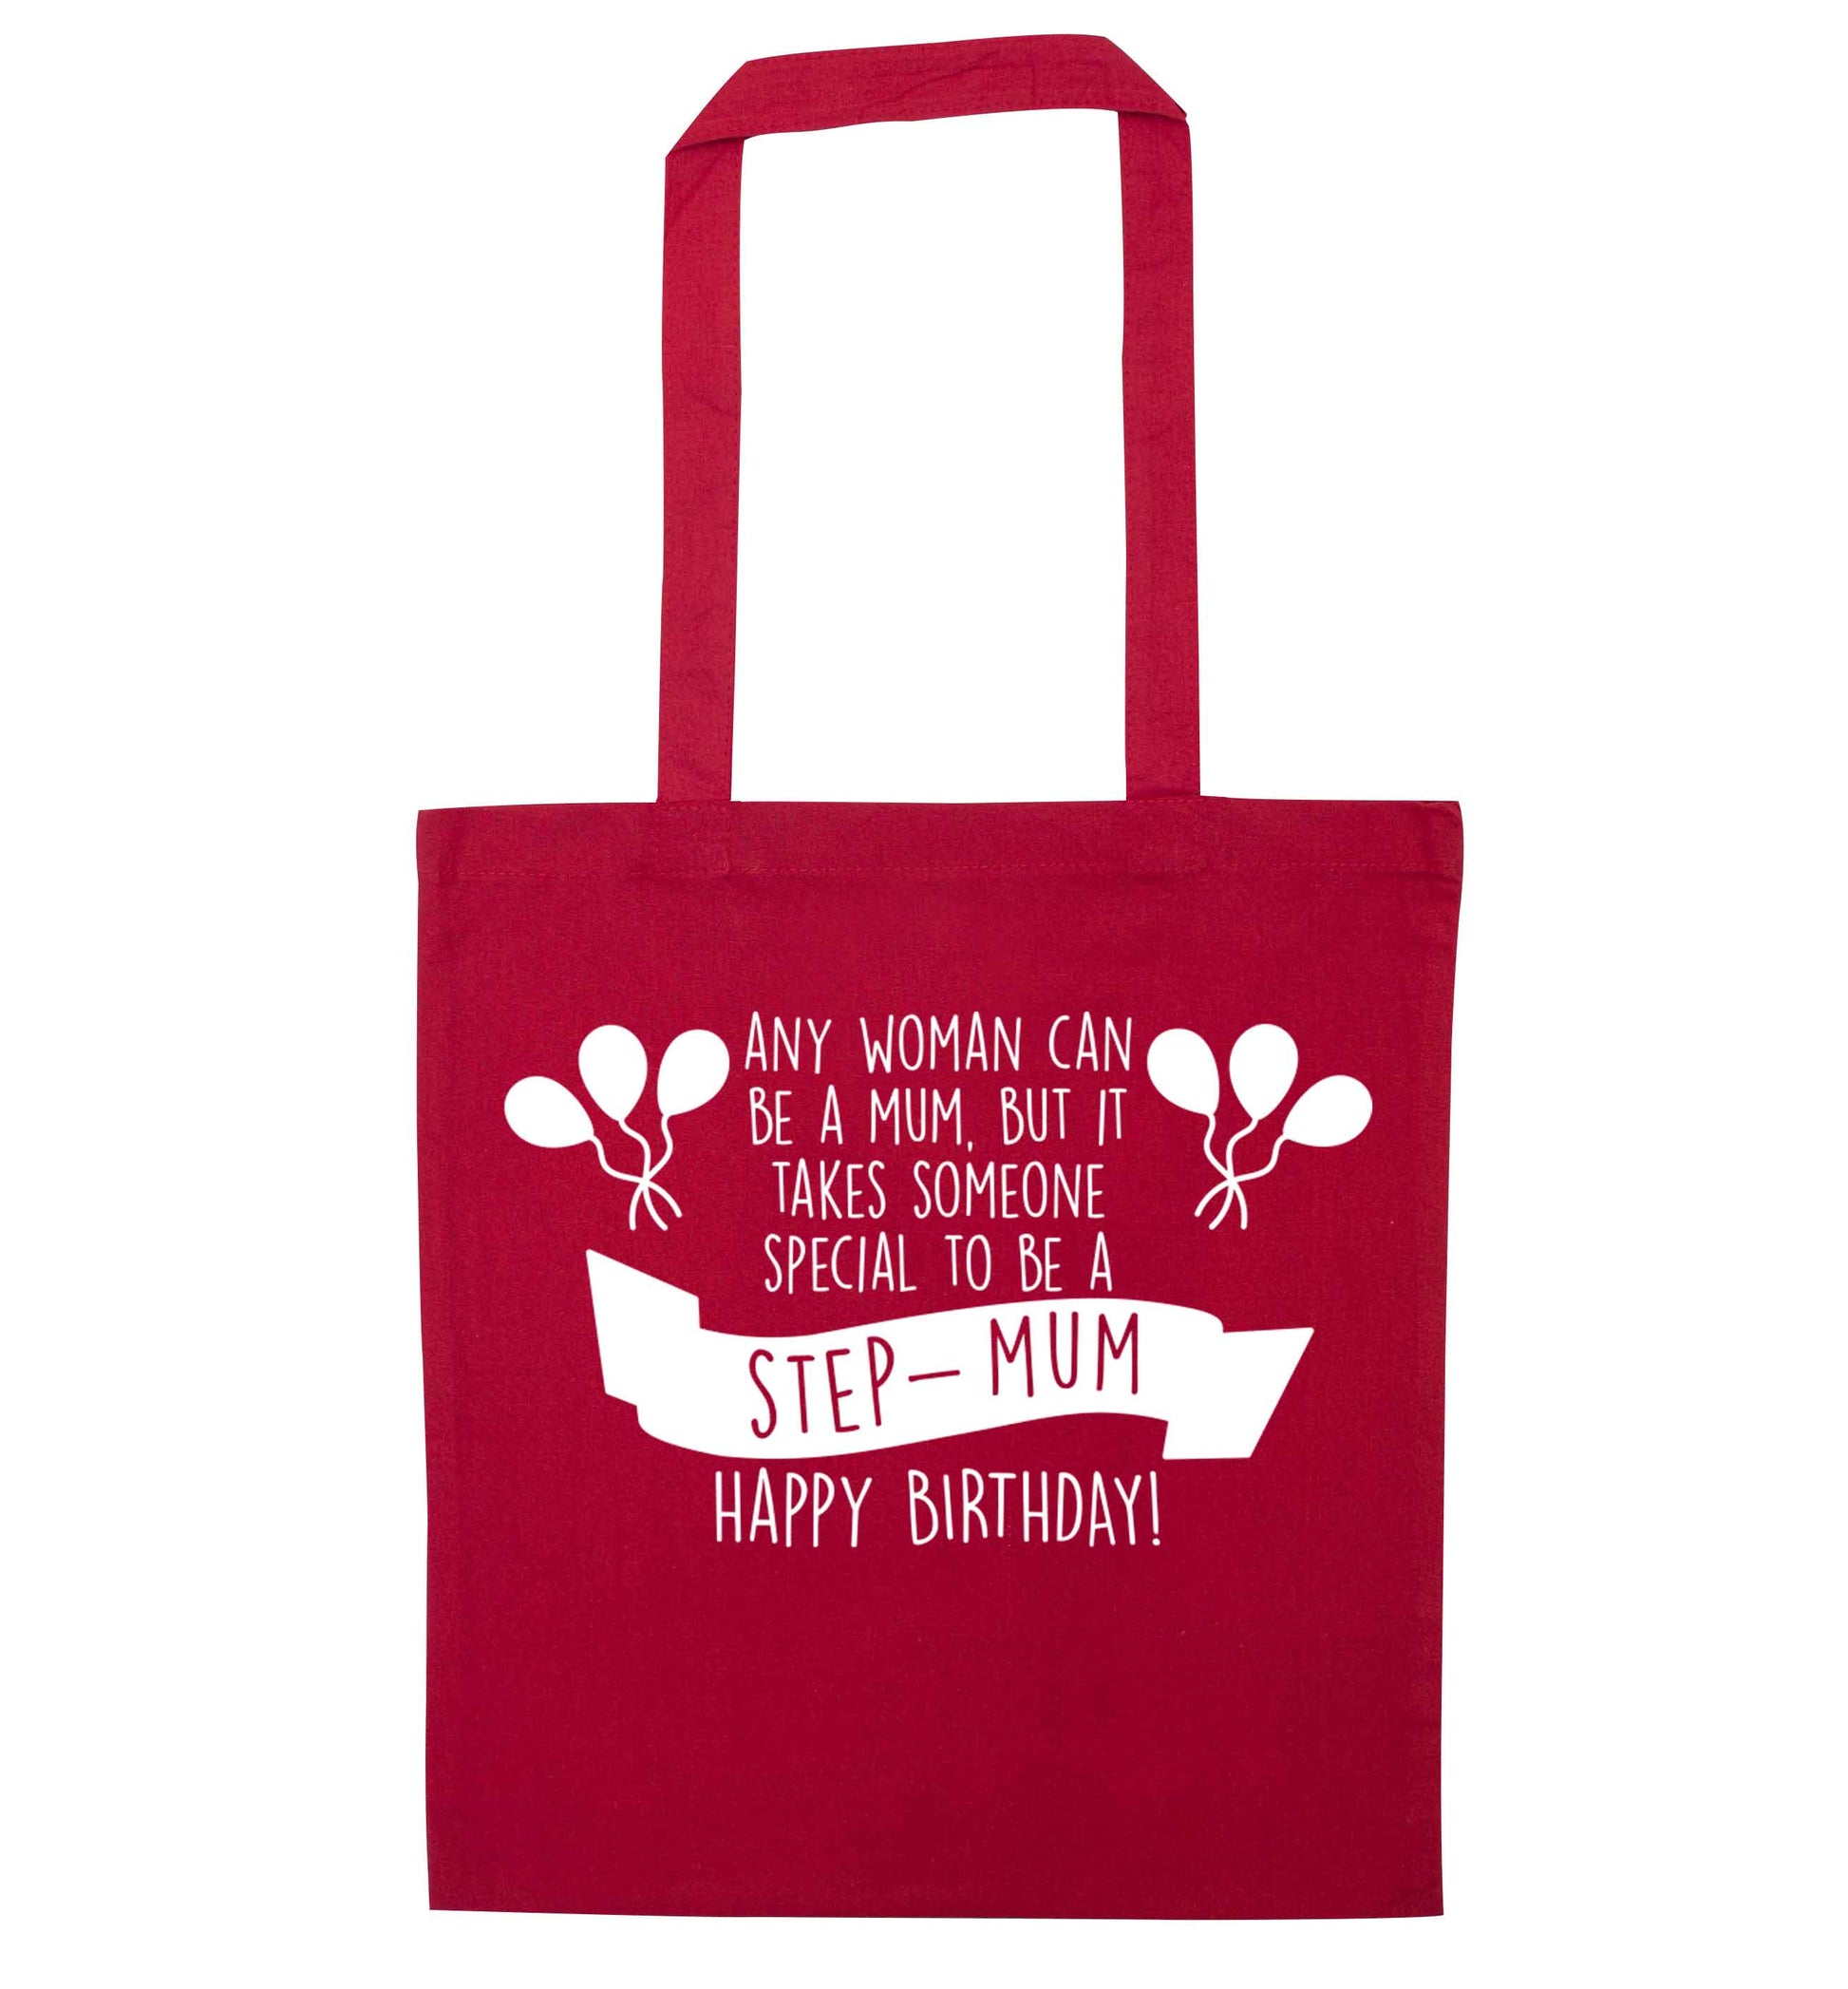 Takes someone special to be a step-mum, happy birthday! red tote bag